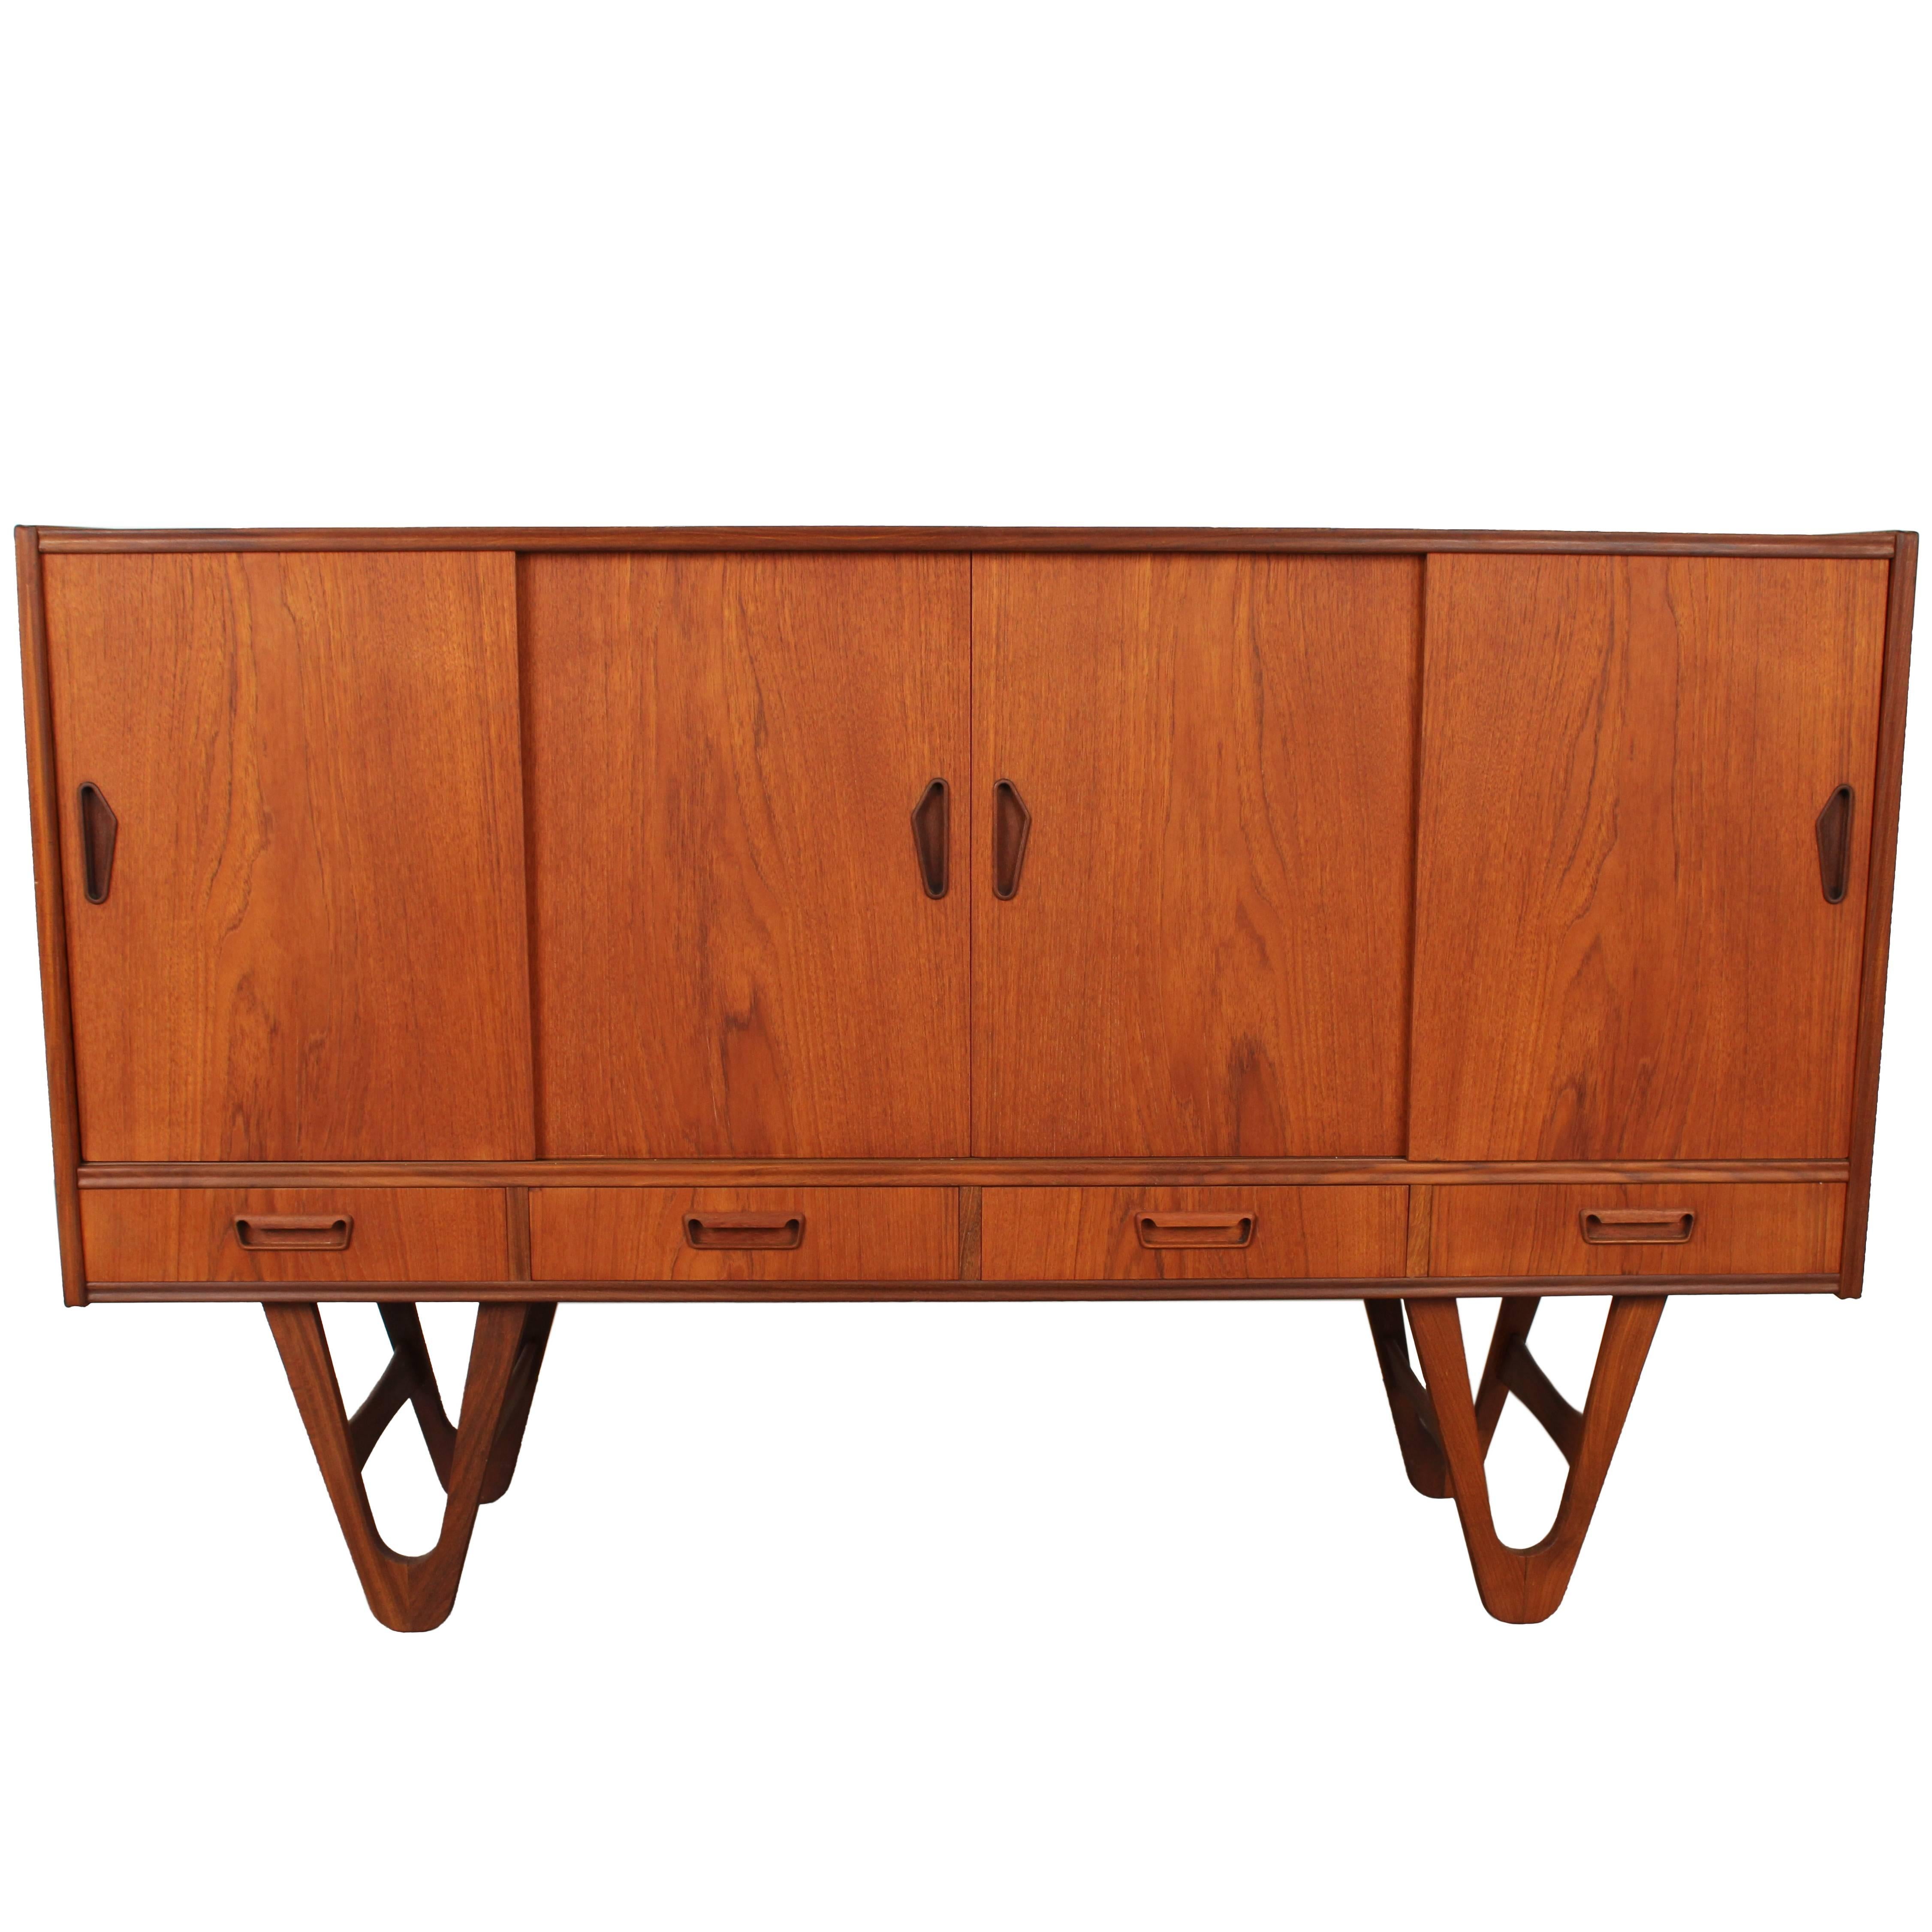 Midcentury Danish Teak Credenza or Buffet with Hairpin Legs